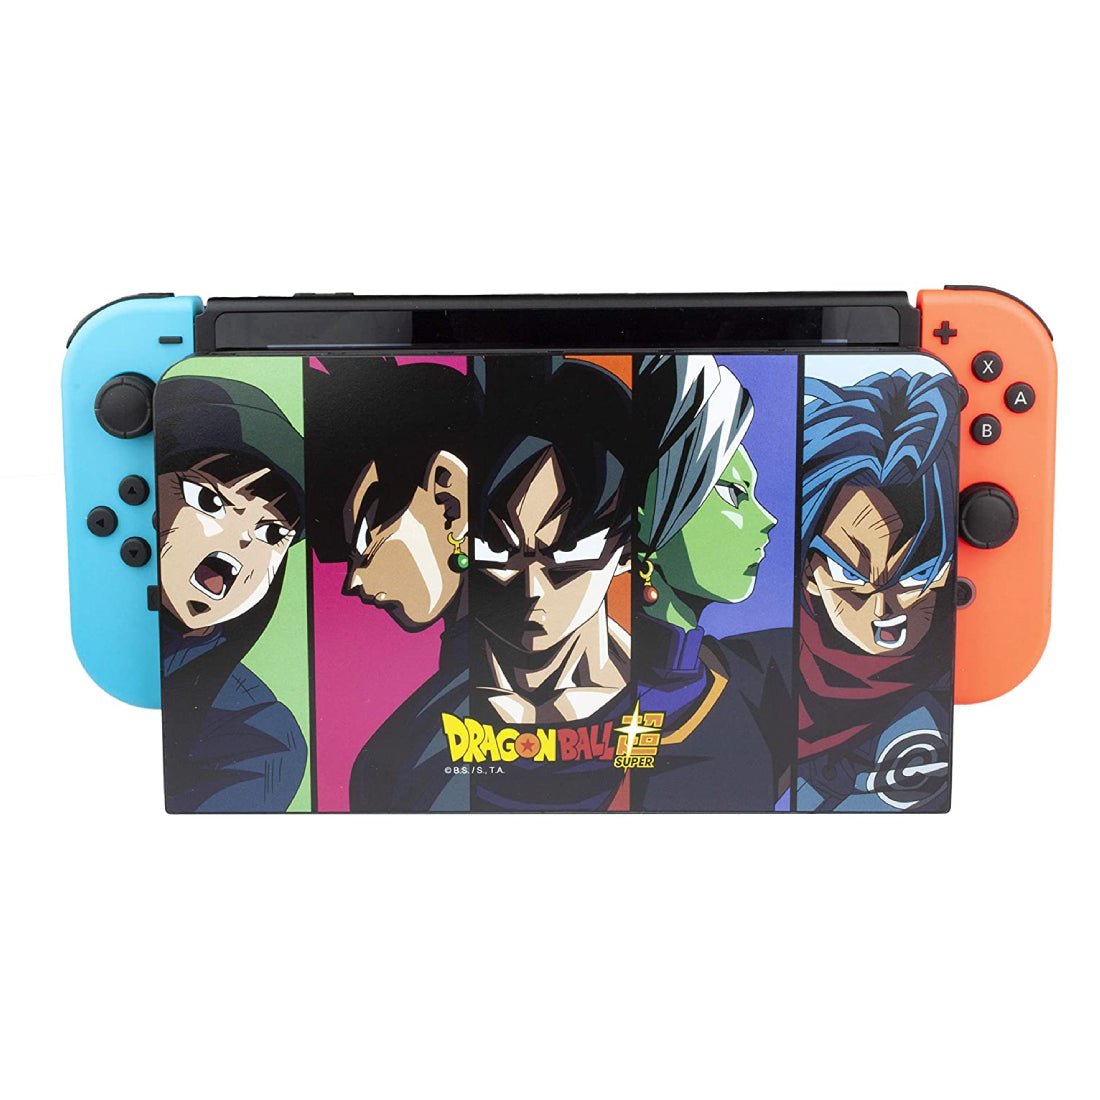 FR-TEC Dragon Ball Super Dock Cover for Nintendo Switch - Store 974 | ستور ٩٧٤